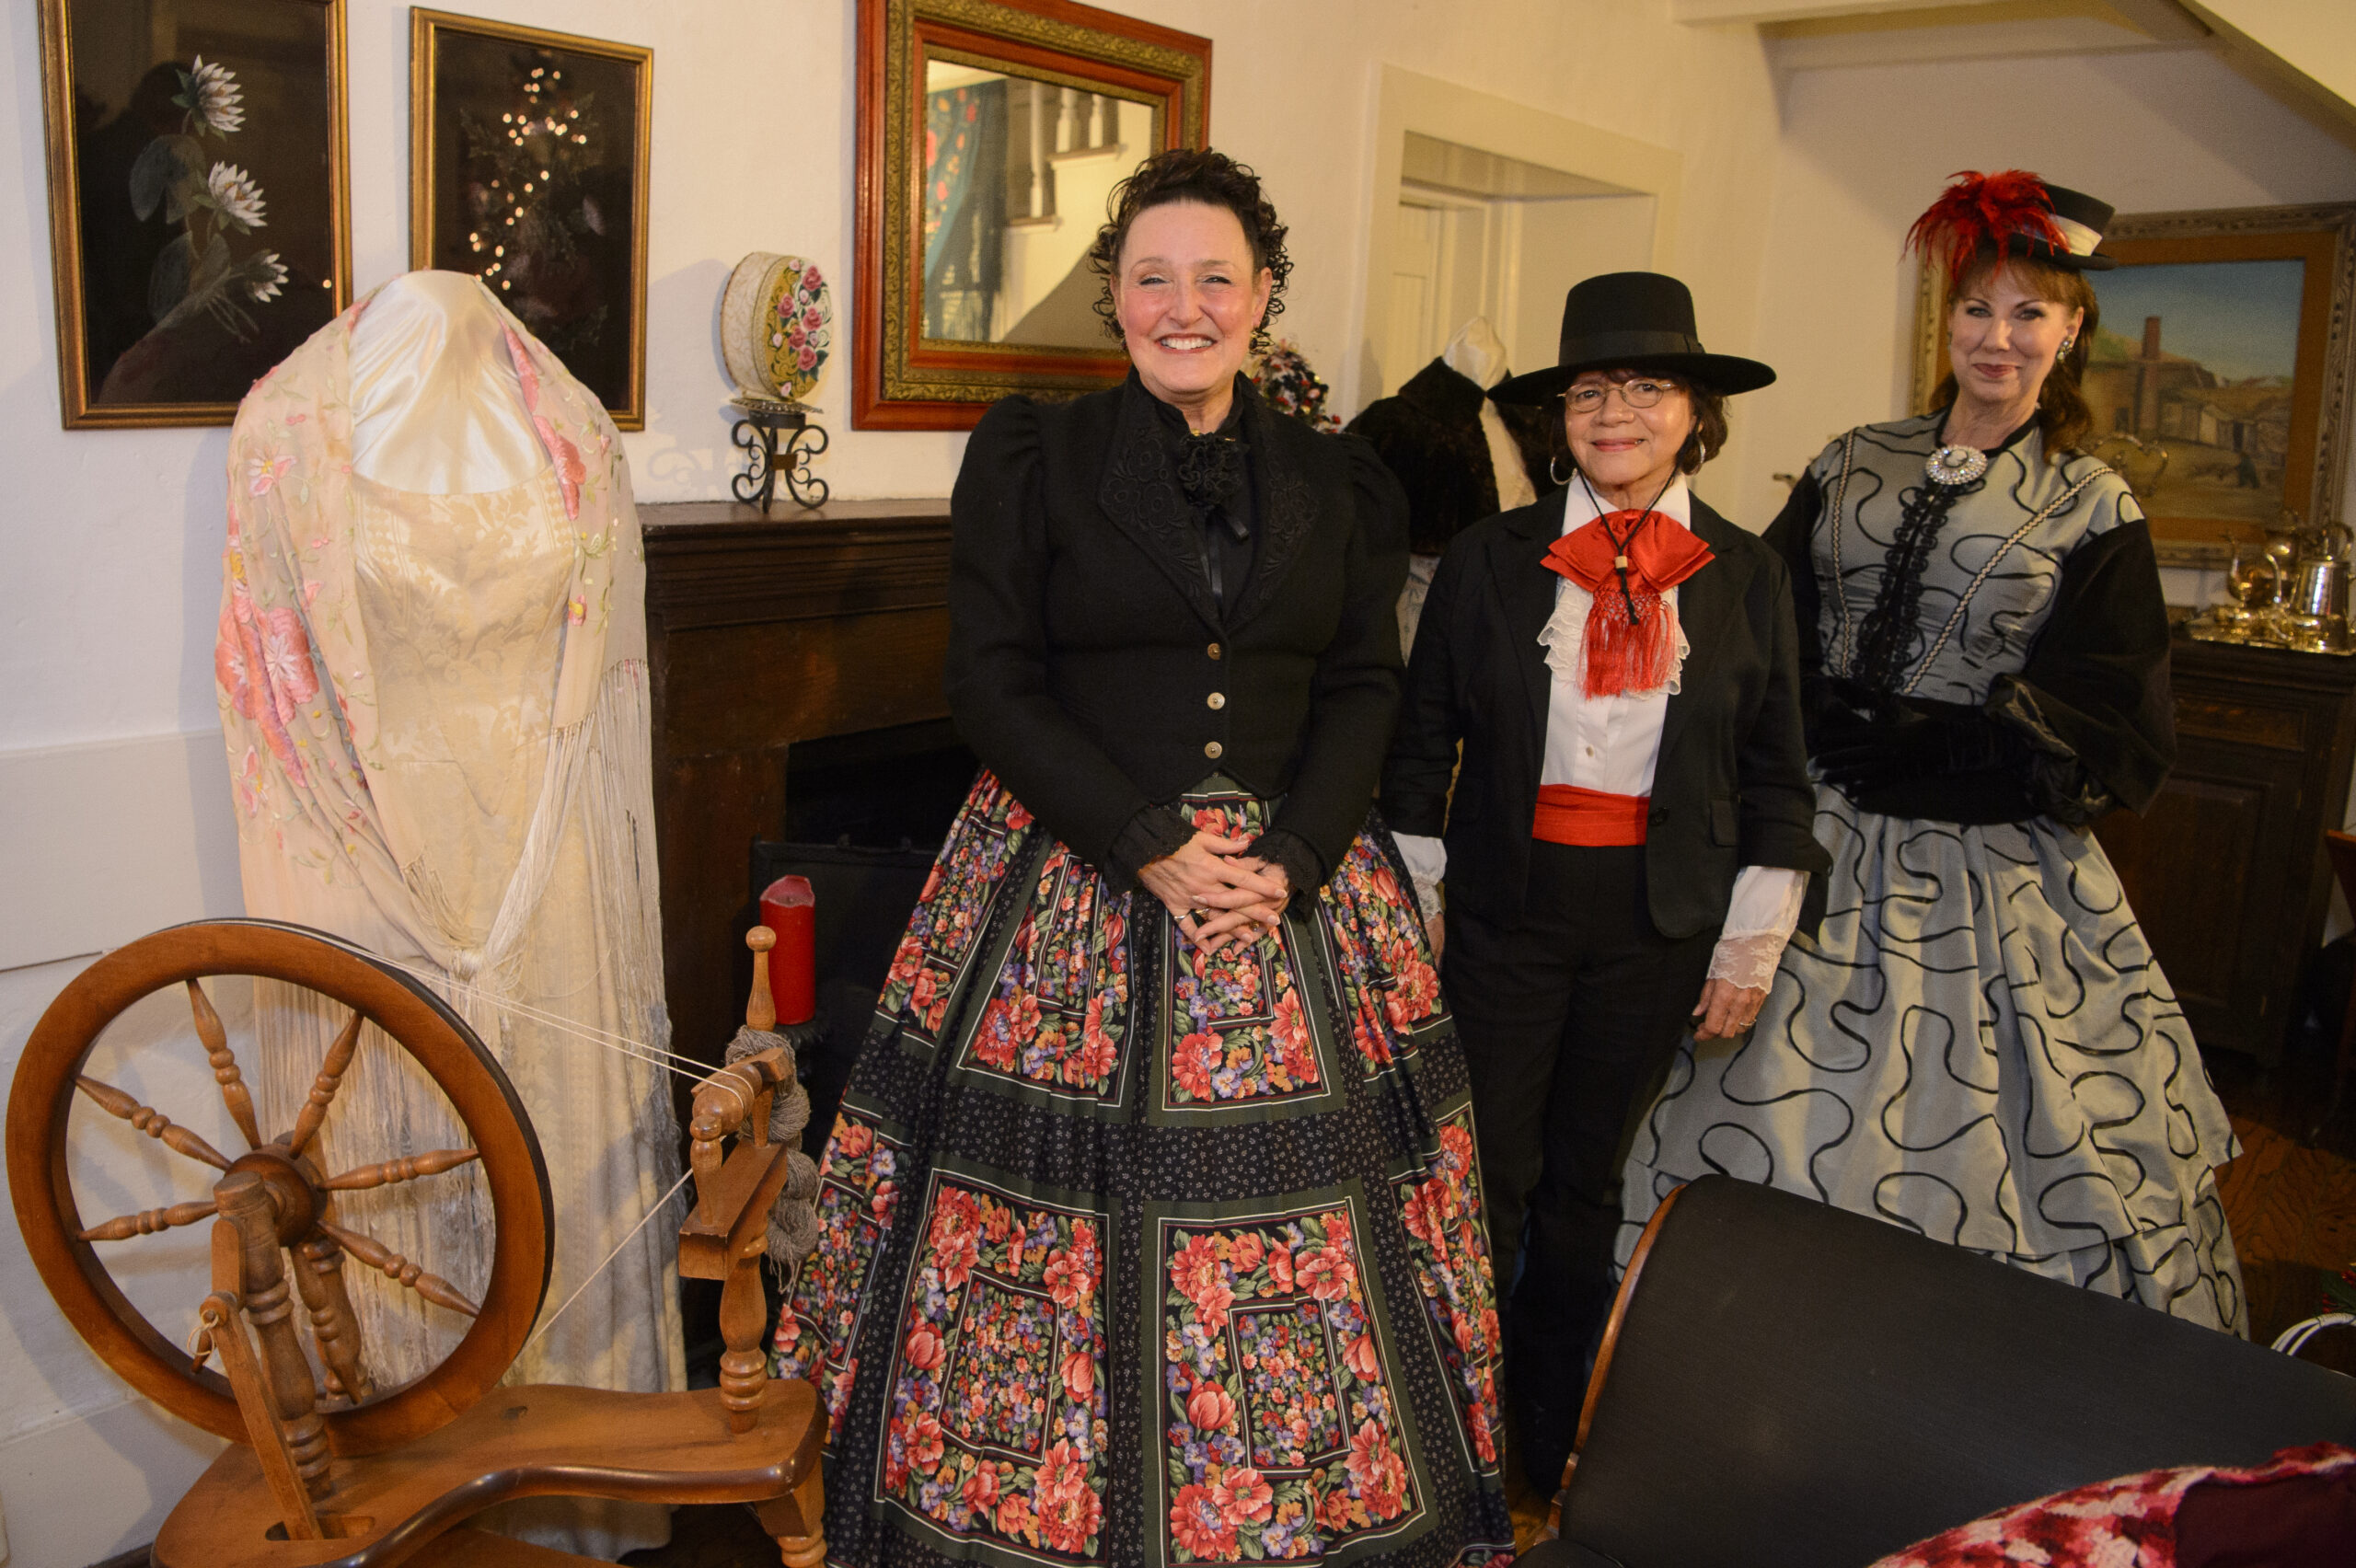 Three volunteers in traditional Mexican costume, welcoming guests next to an antique spinning wheel.